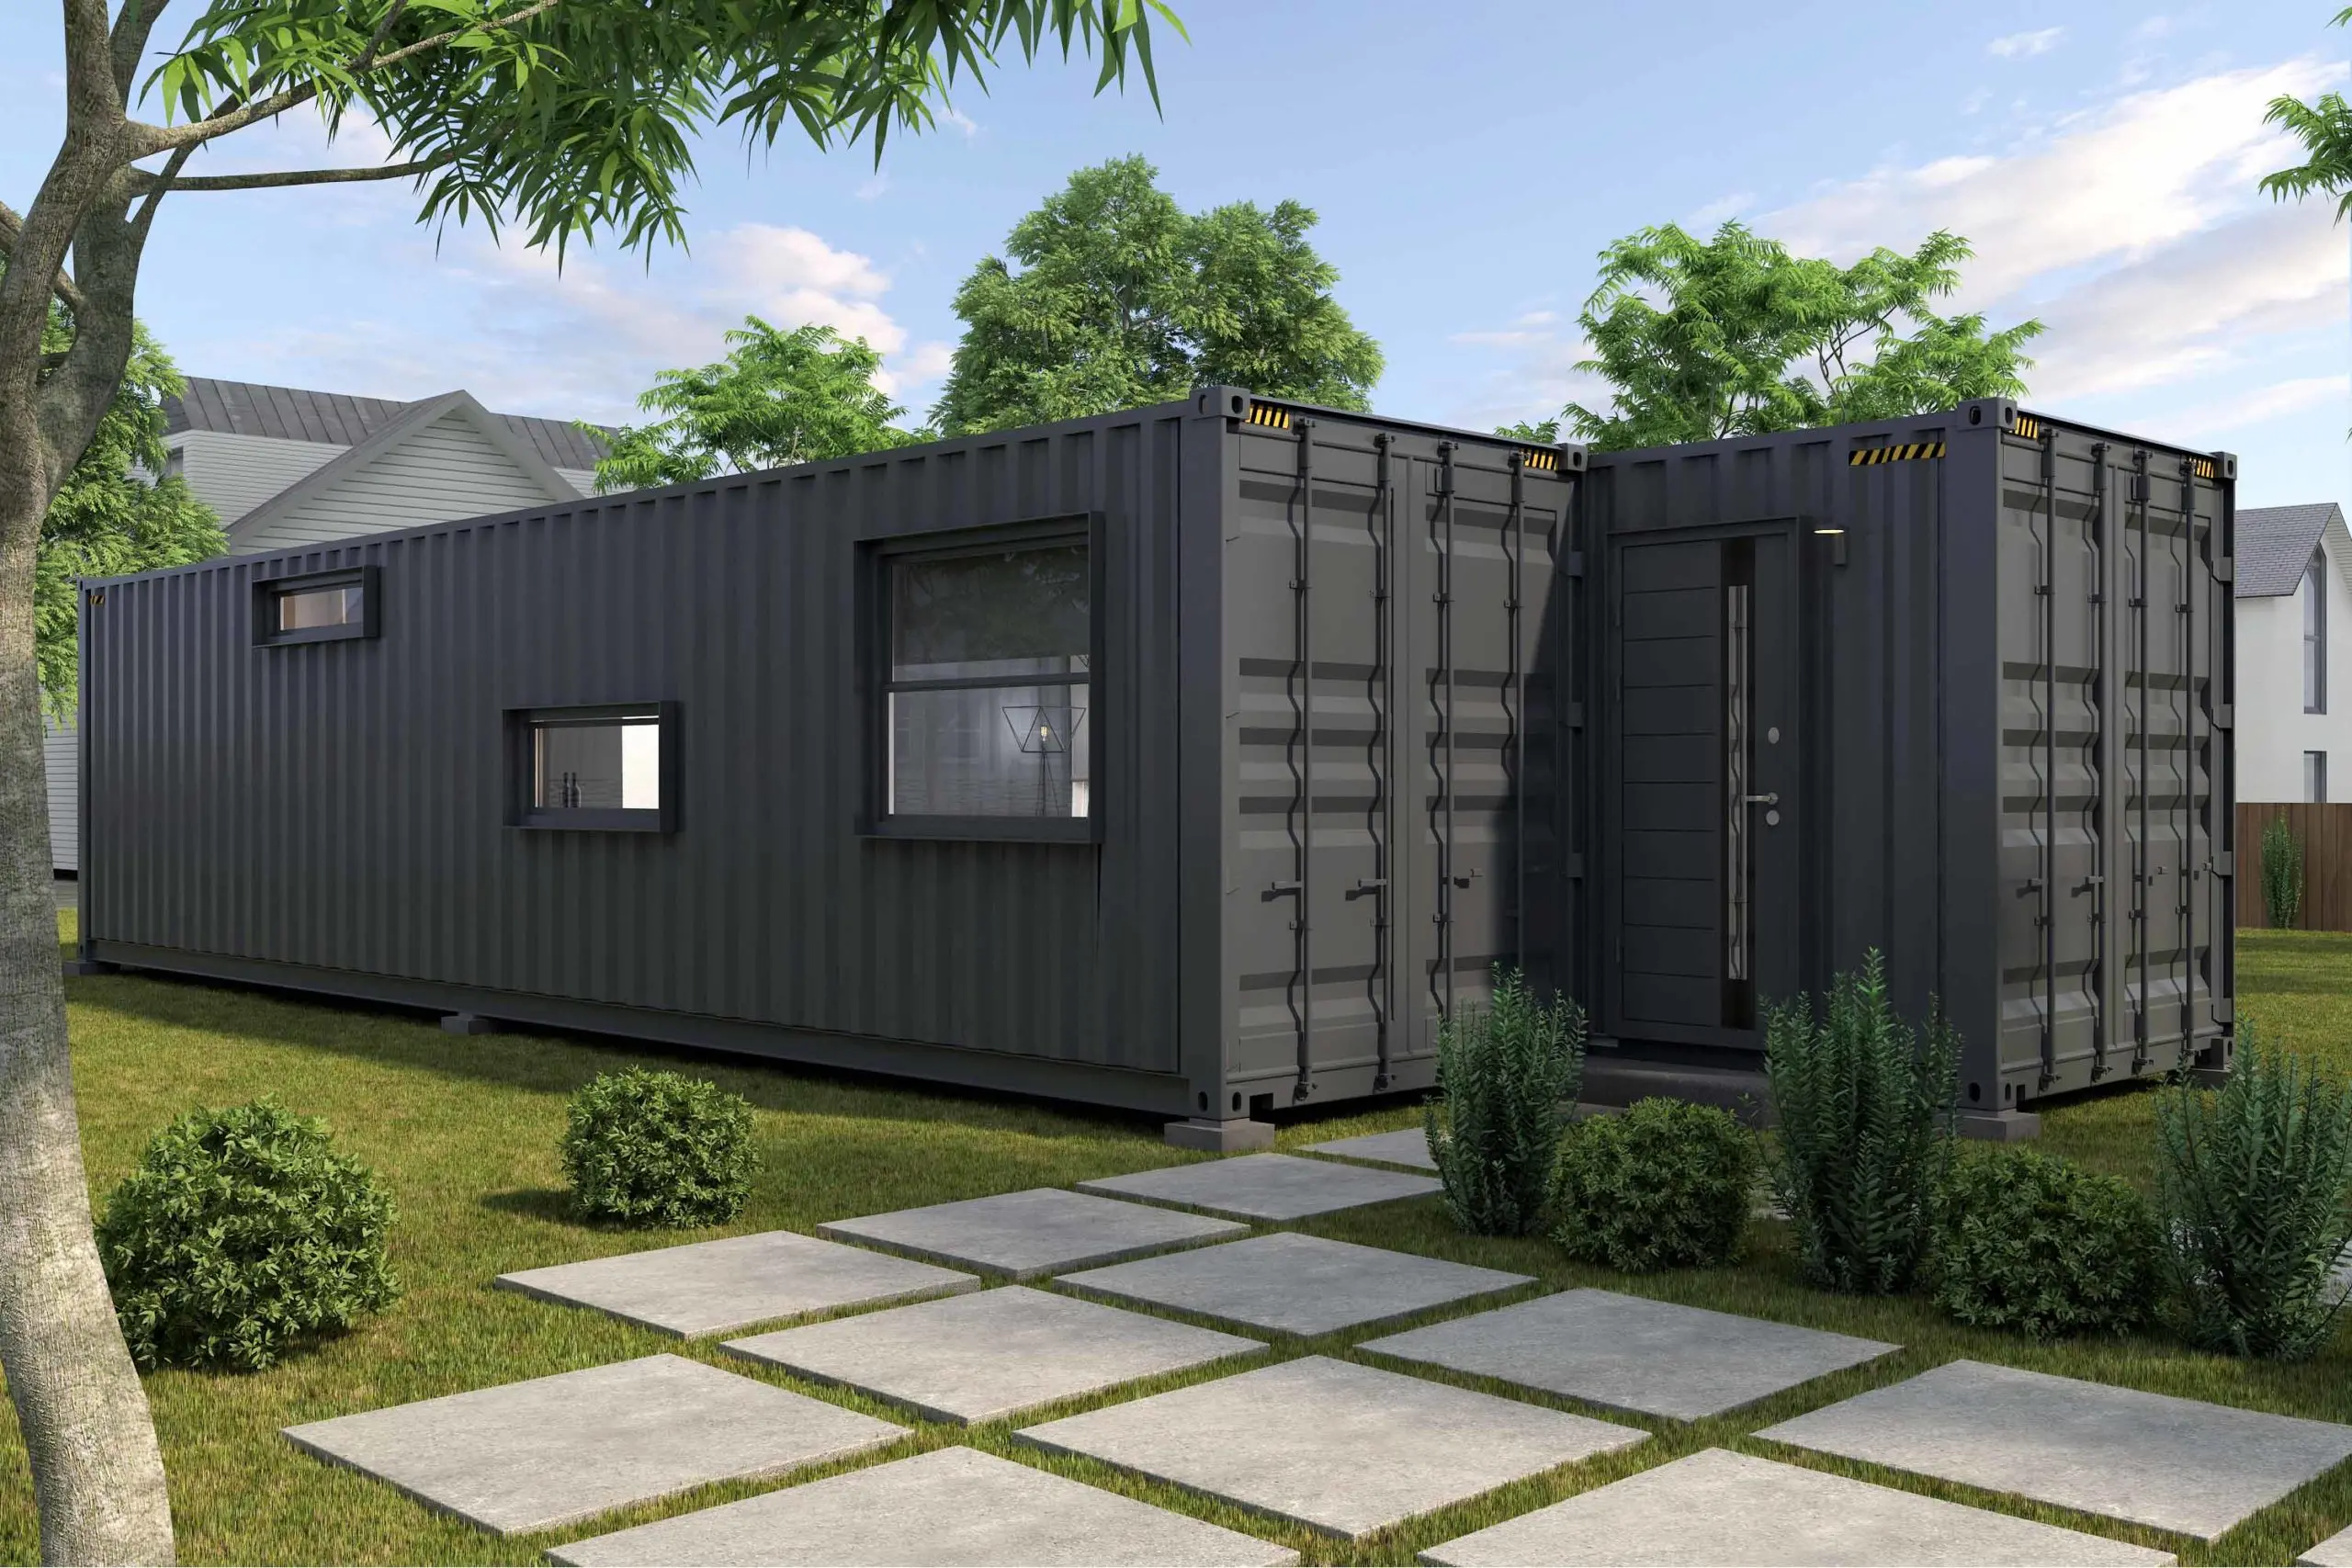 Are Shipping Container Homes Safe?